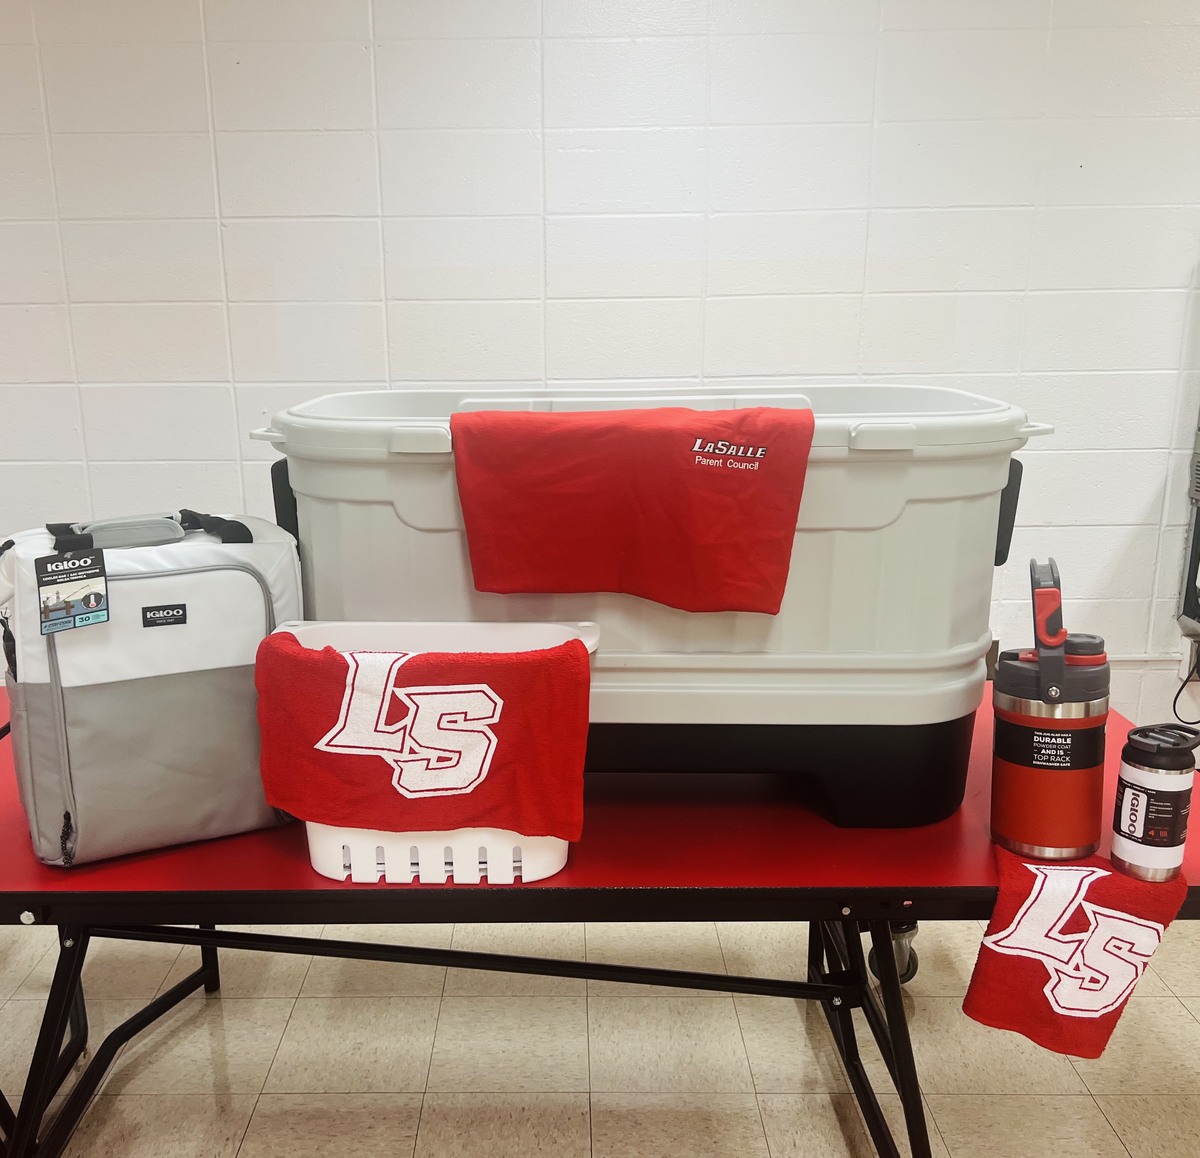 Picture of cooler items being raffled off